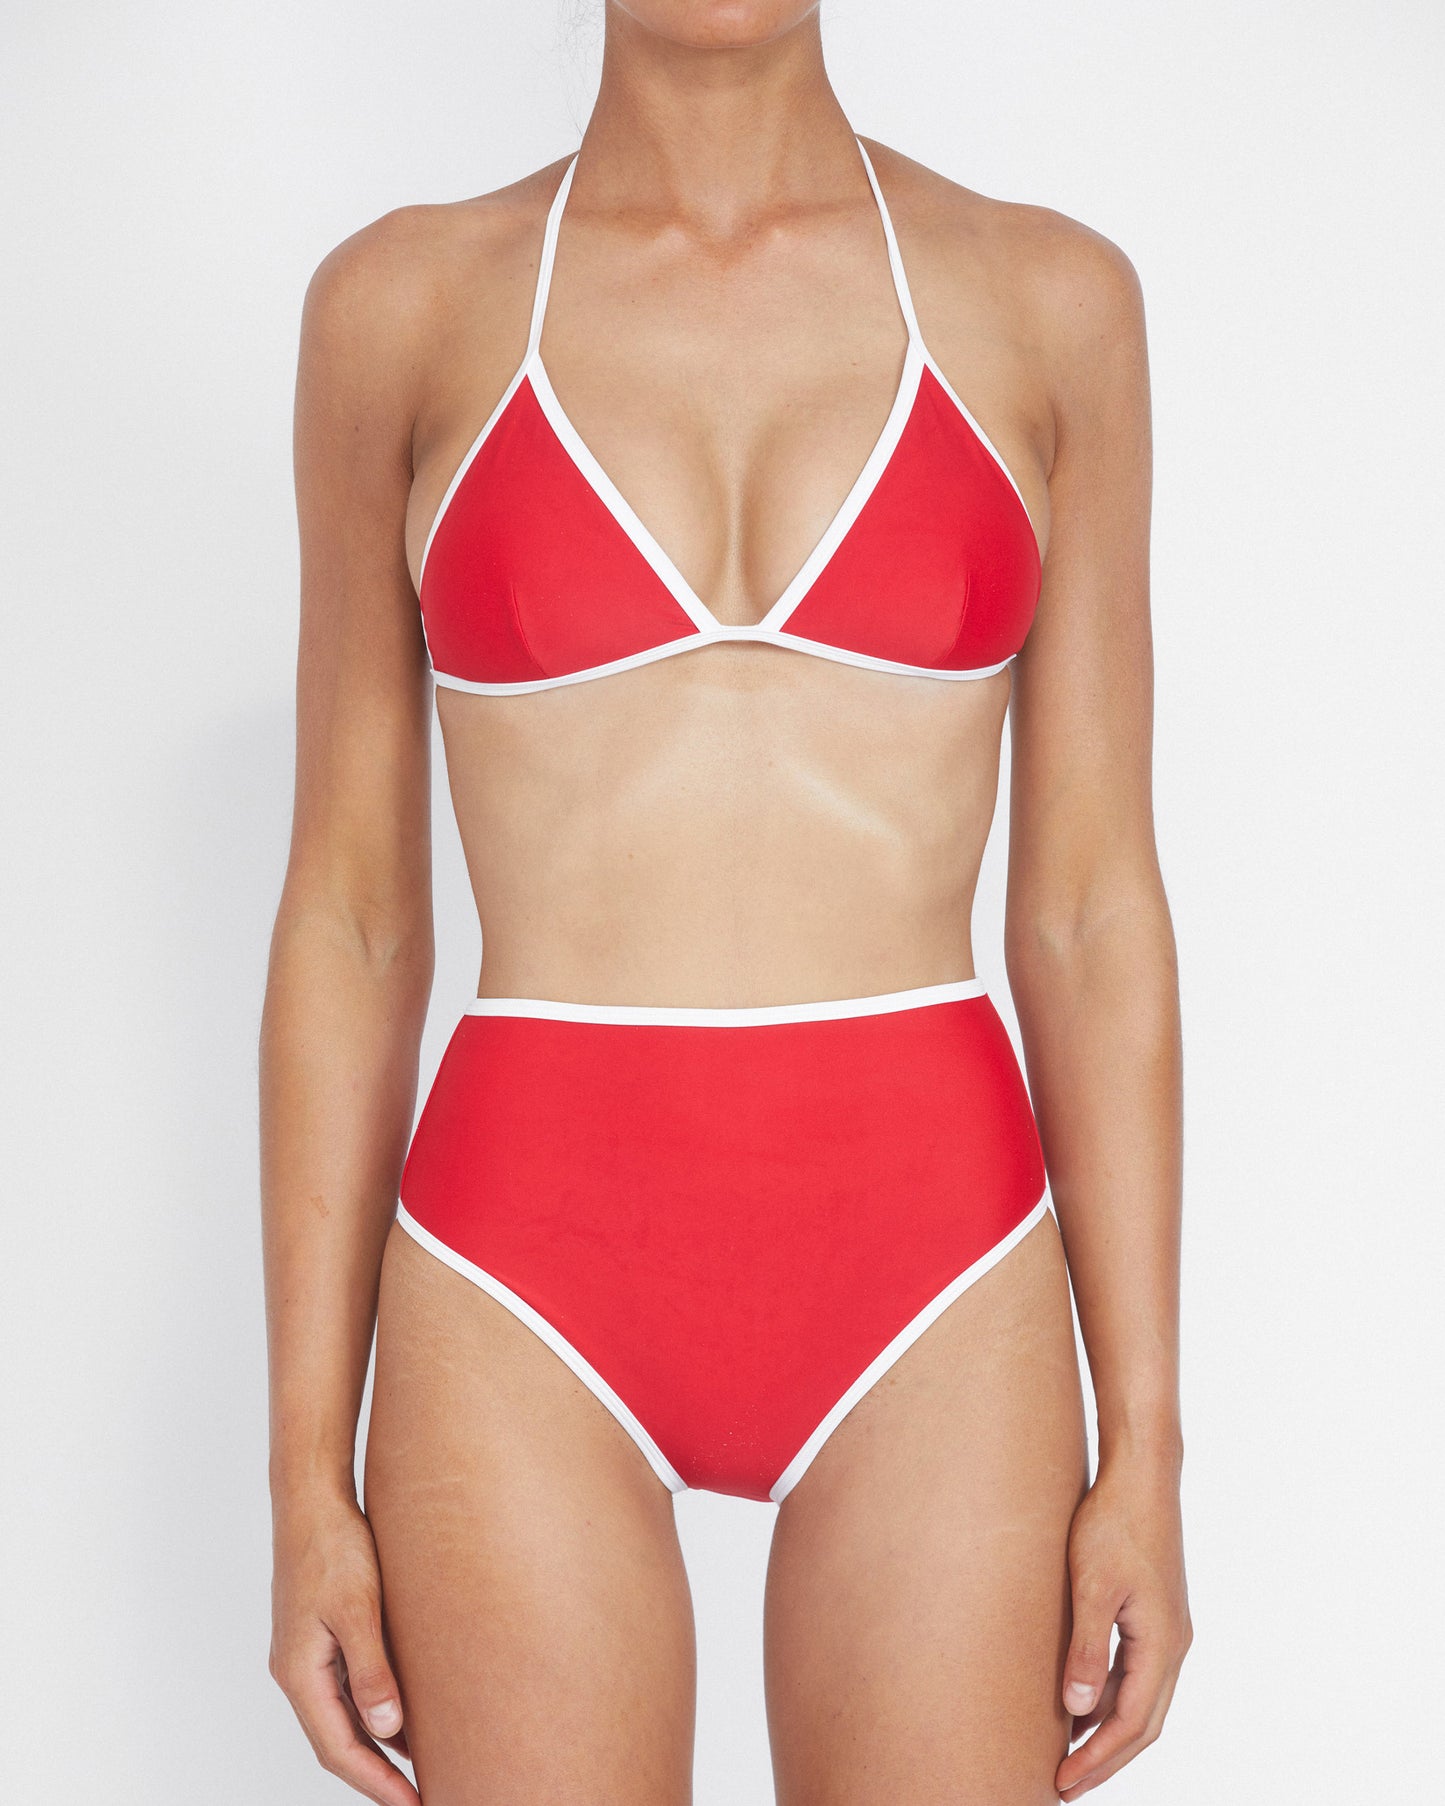 It's Now Cool Swimwear - Duo Tri Top - Red & White Contrast